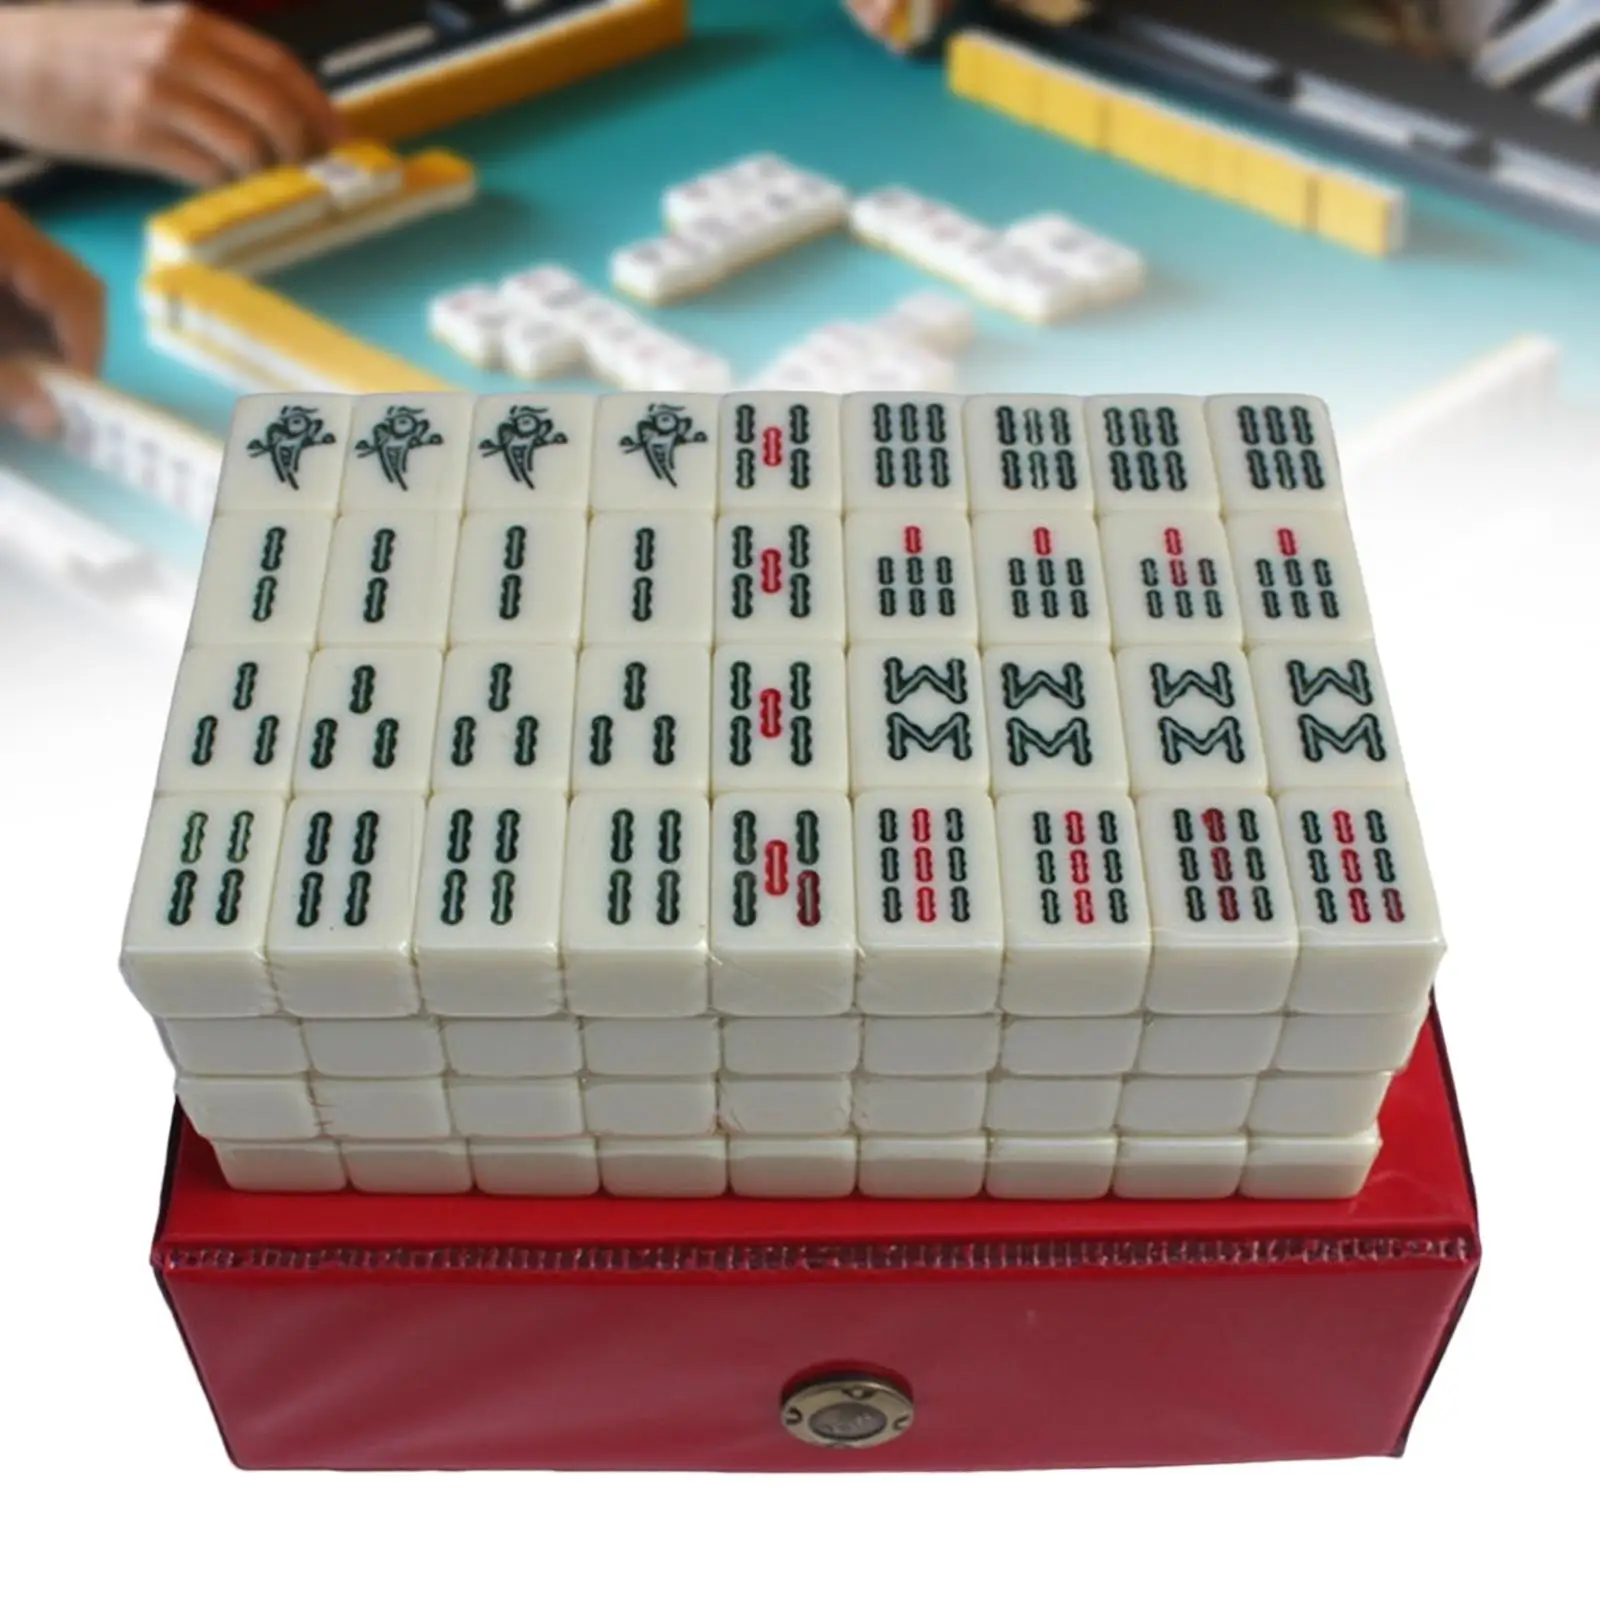 Portable Complete Mahjong Game Set Board Game with Carrying Case mahjong  Activity Game Tiles Game and 2 Blank Tiles for Travel - AliExpress